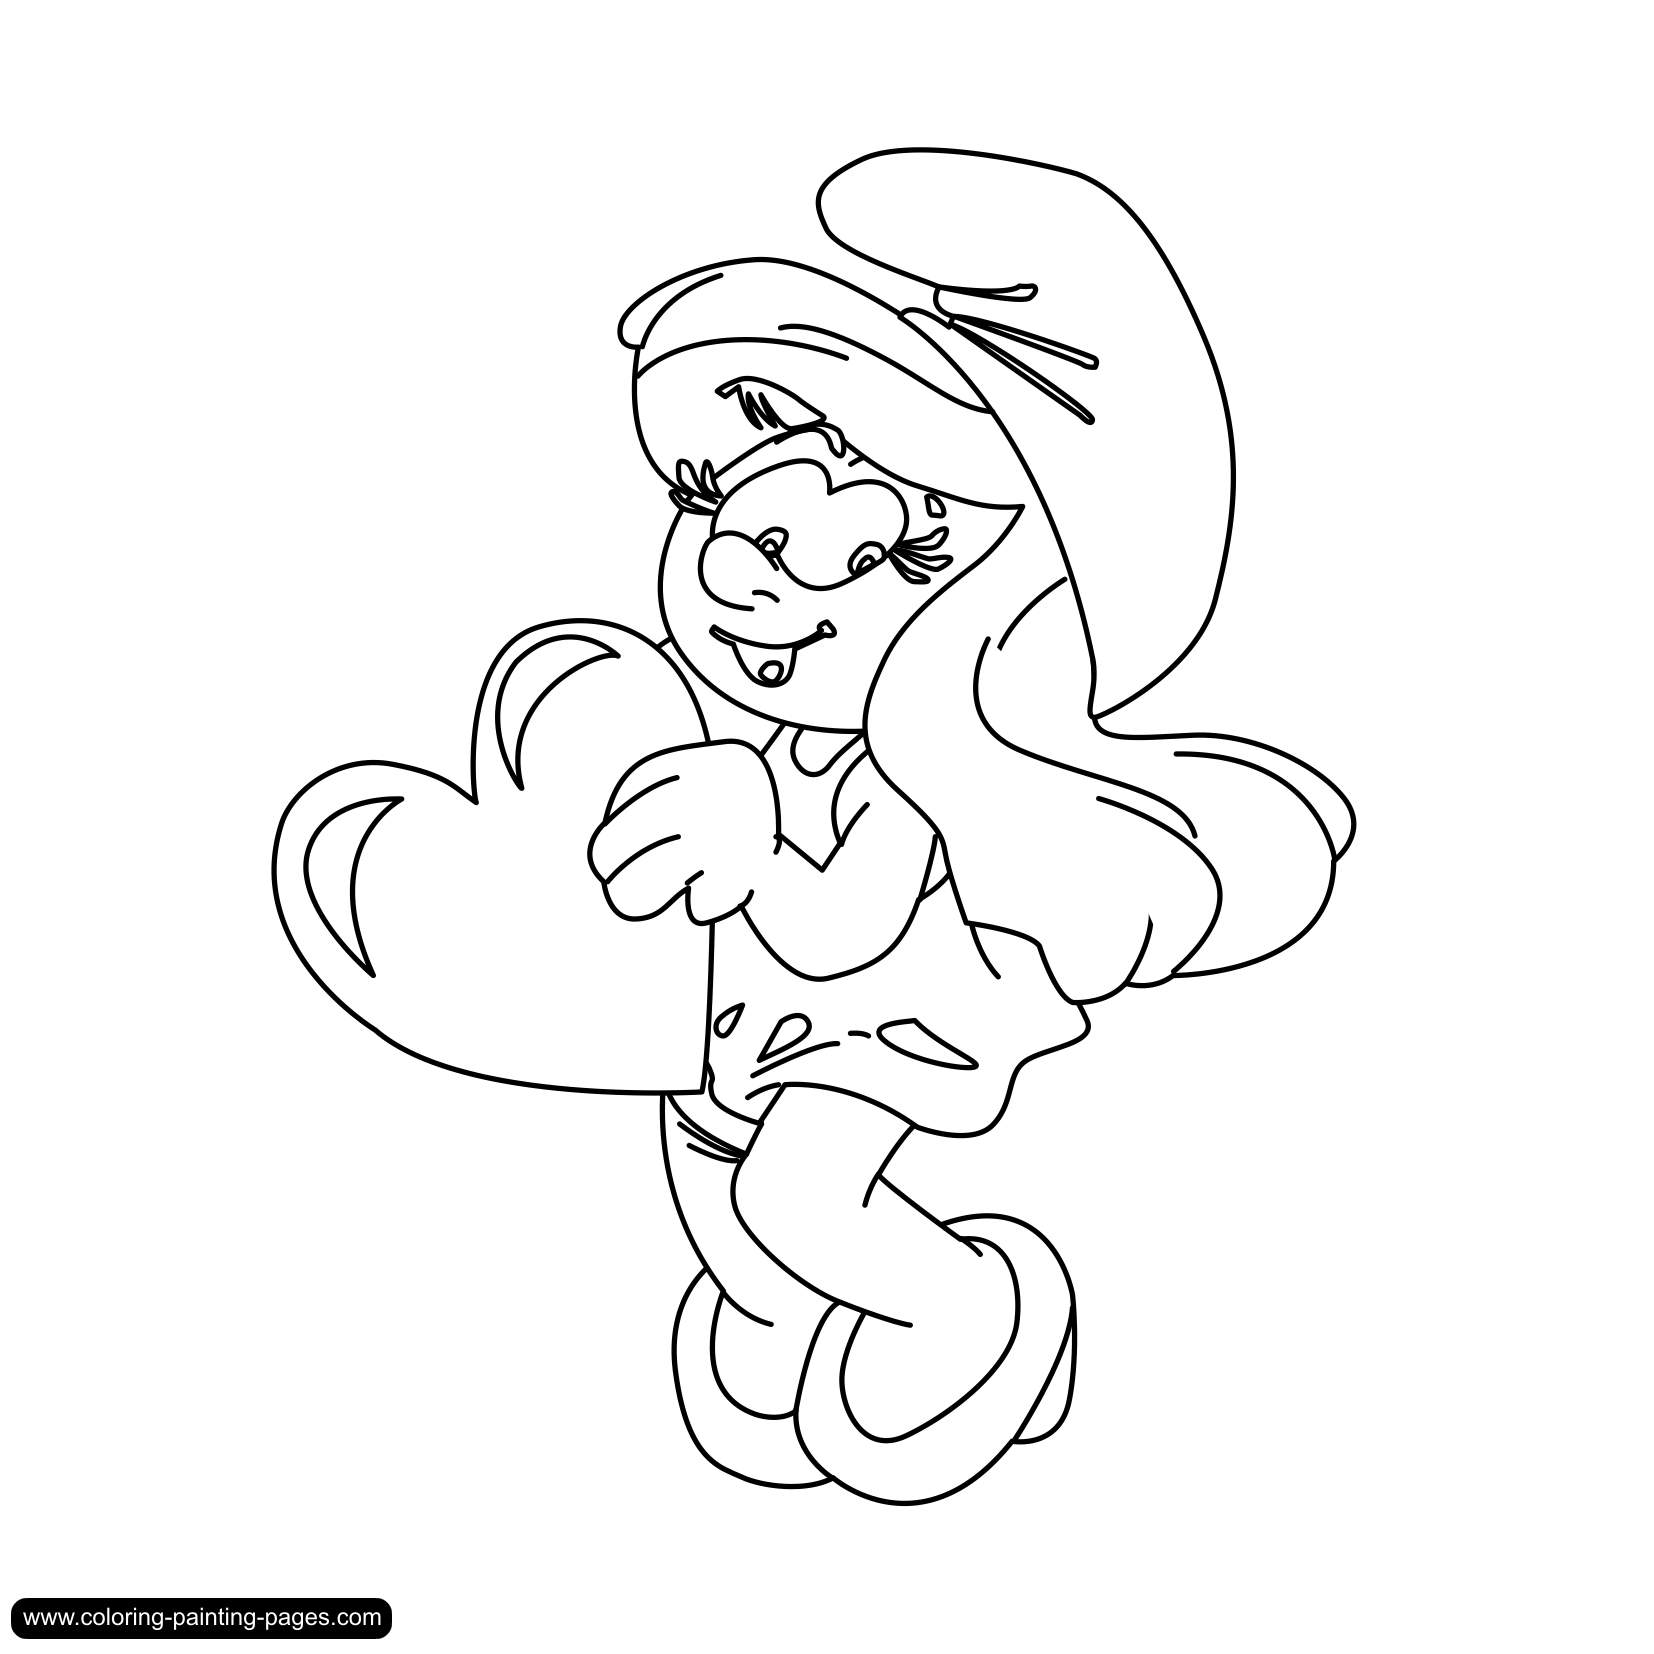 smurfs coloring pages free - photo #29